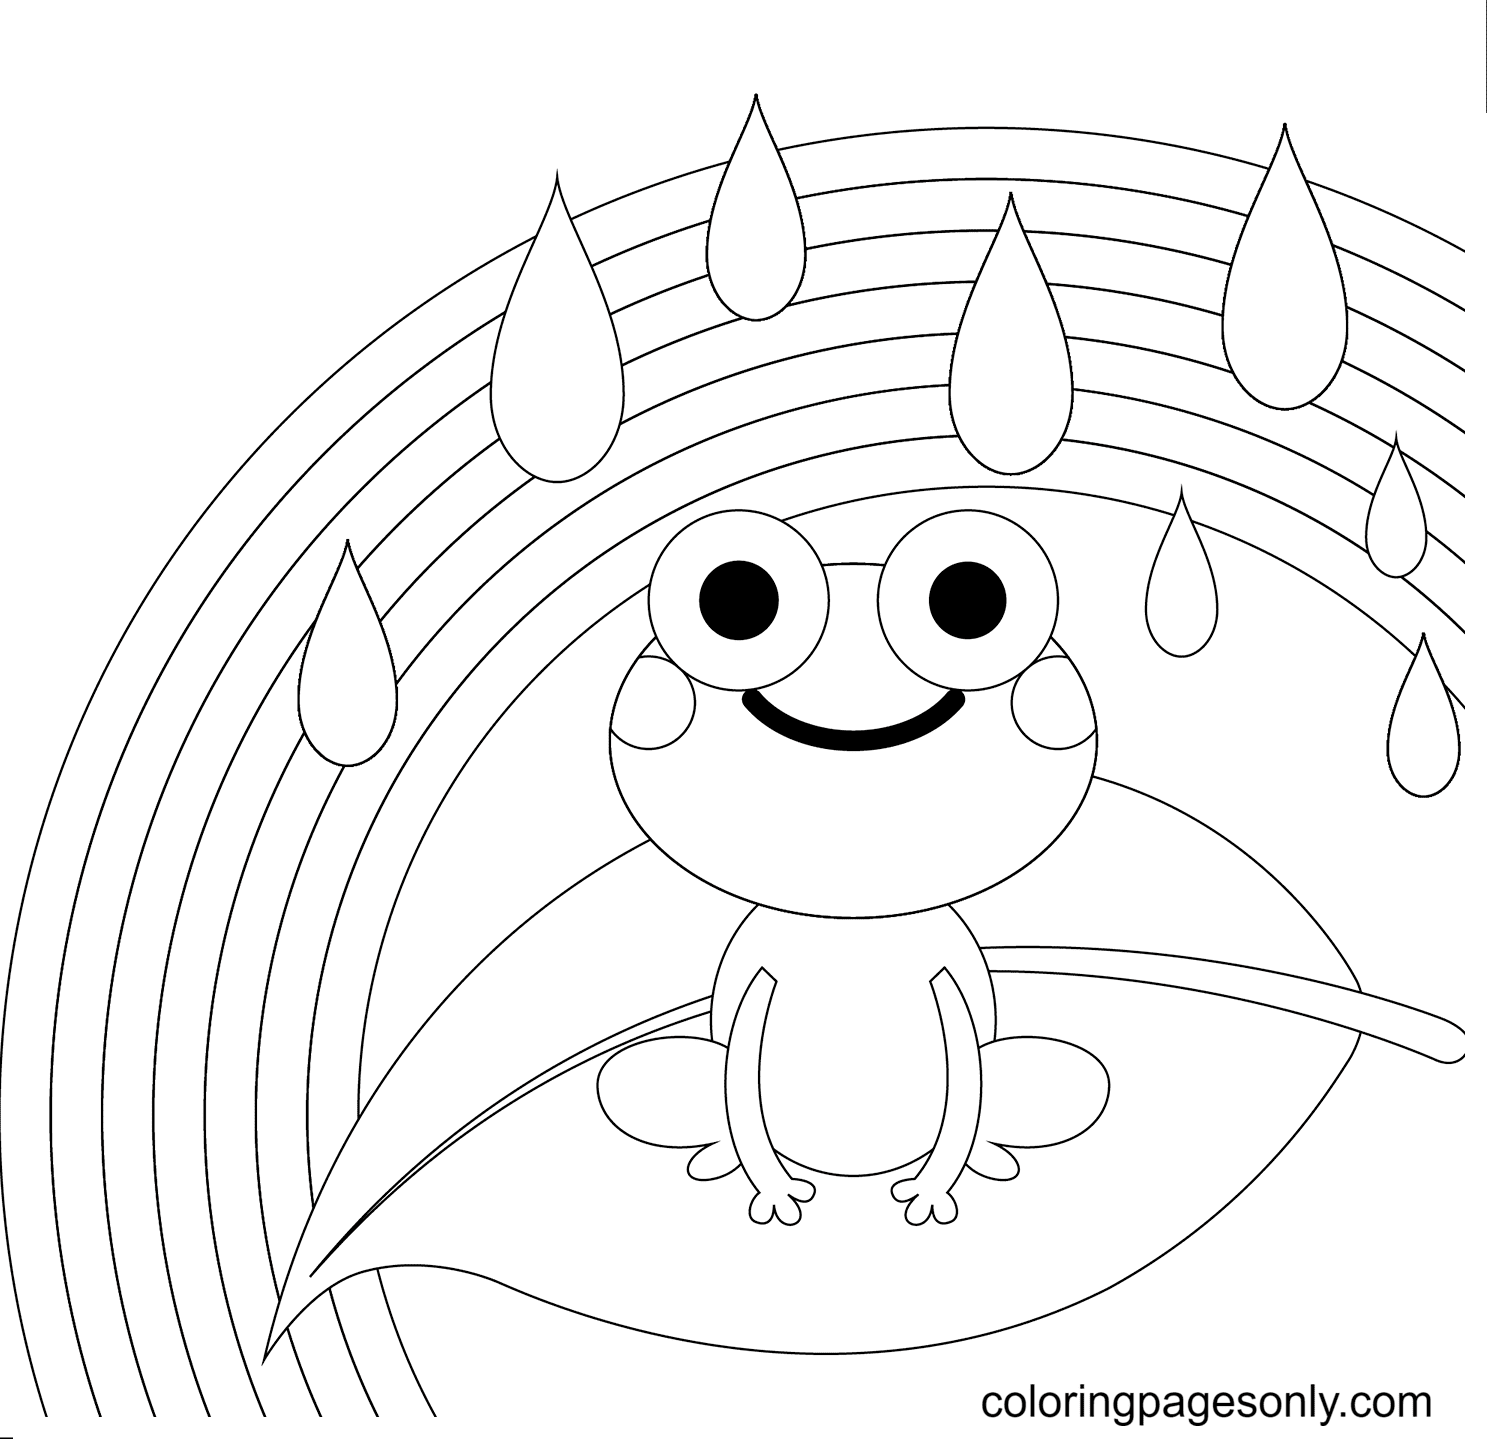 Rainbow and Frog Coloring Pages - Frog Coloring Pages - Coloring Pages For  Kids And Adults